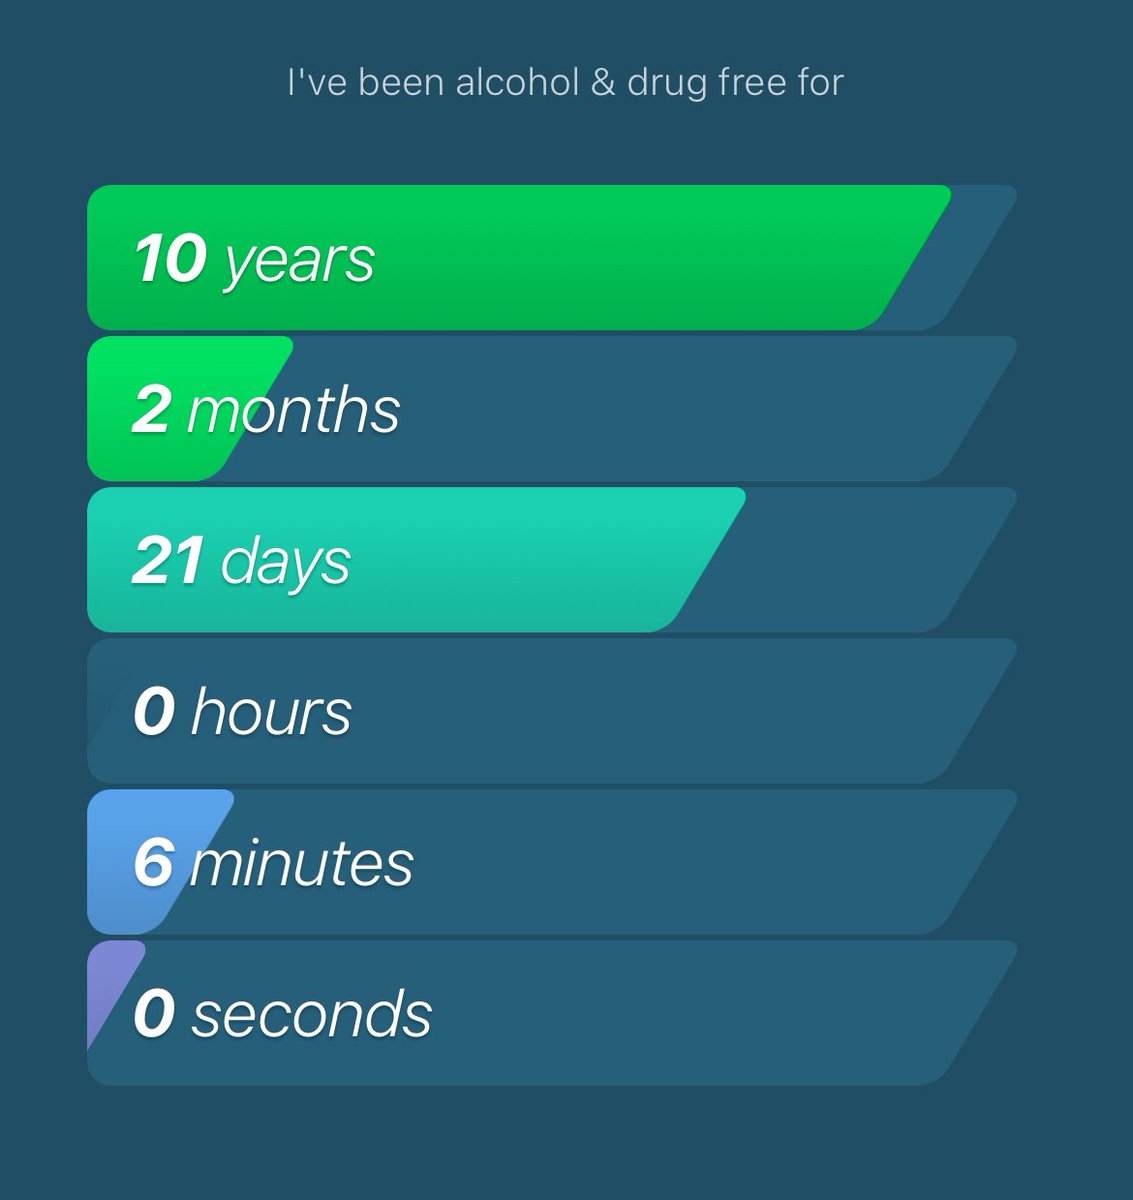 Oh yeah baby 💪🏼 #sober #sobriety #drugfree #alcoholic #cleanandsober